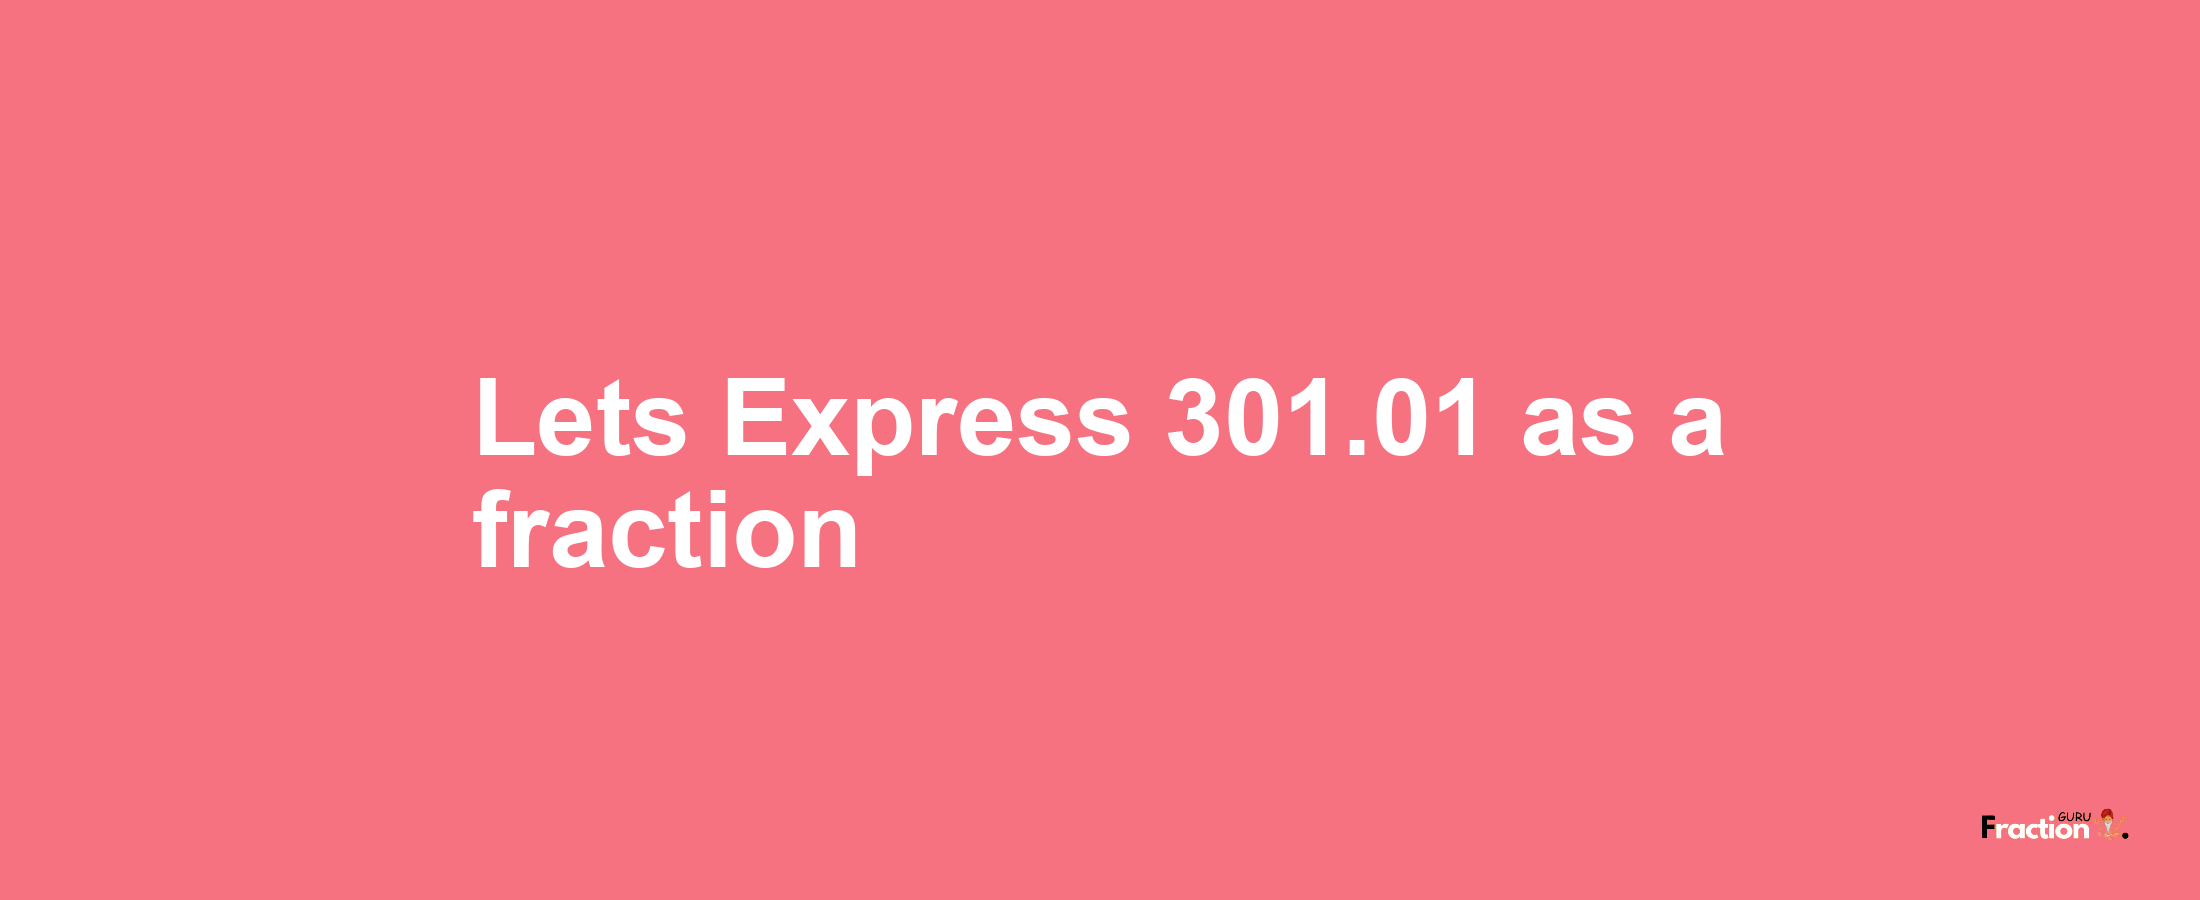 Lets Express 301.01 as afraction